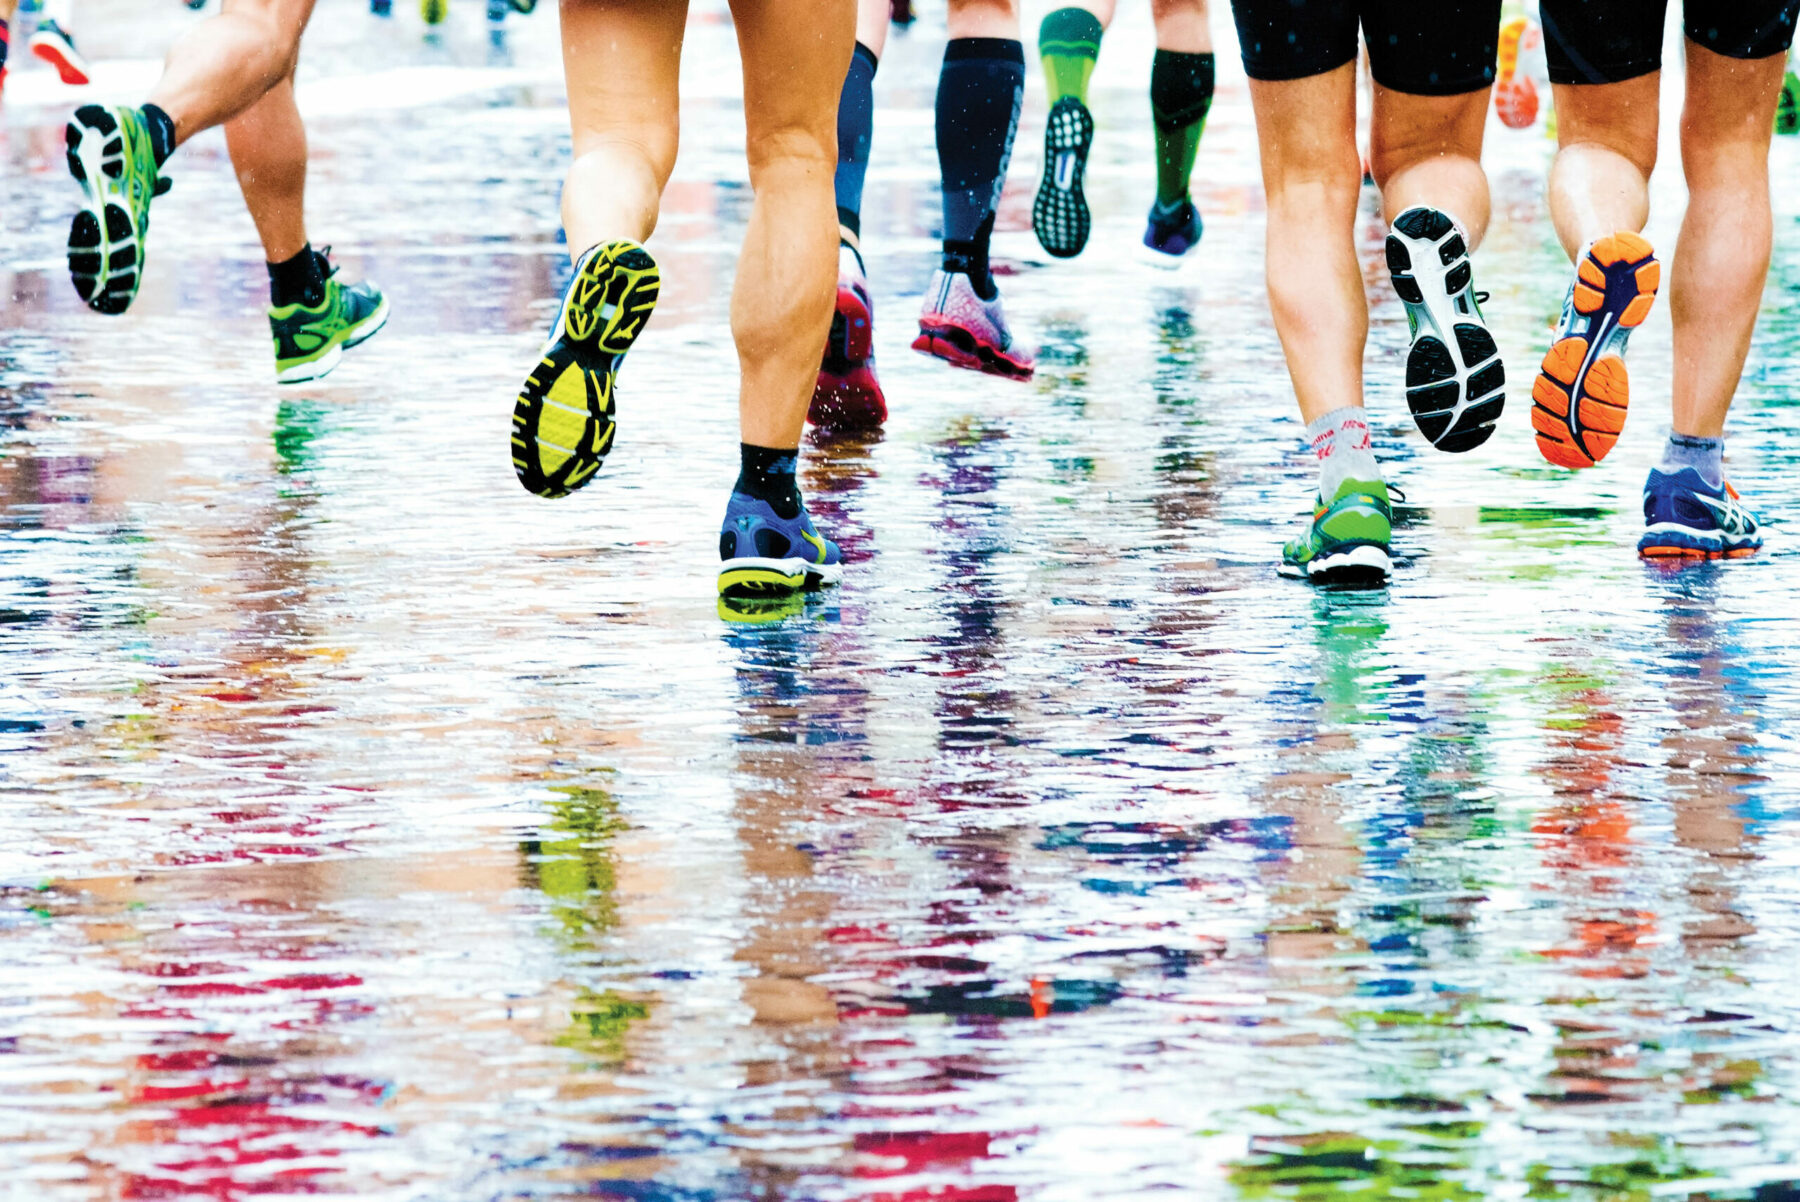 people running in a marathon on a wet surface.